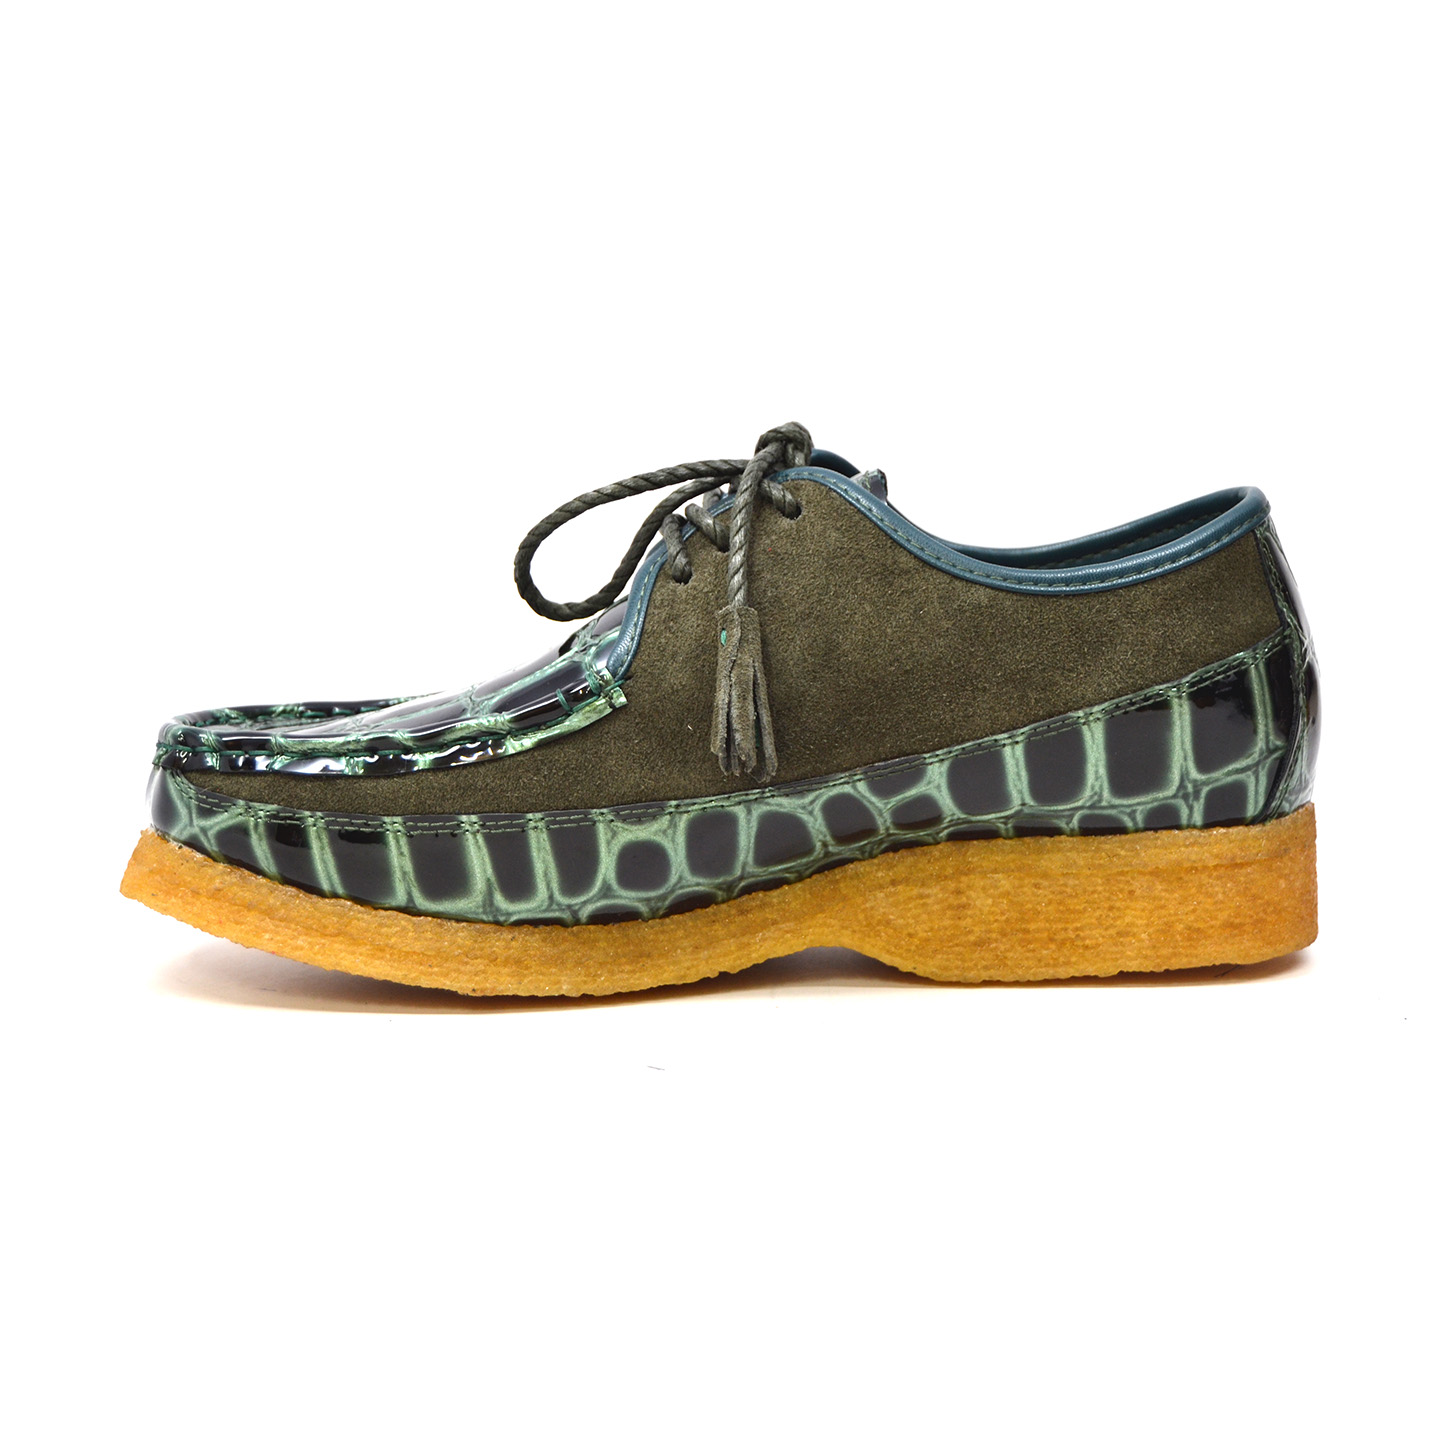 British Collection Crown Croc-Green Suede and Croc [613-33] - $160.00 ...